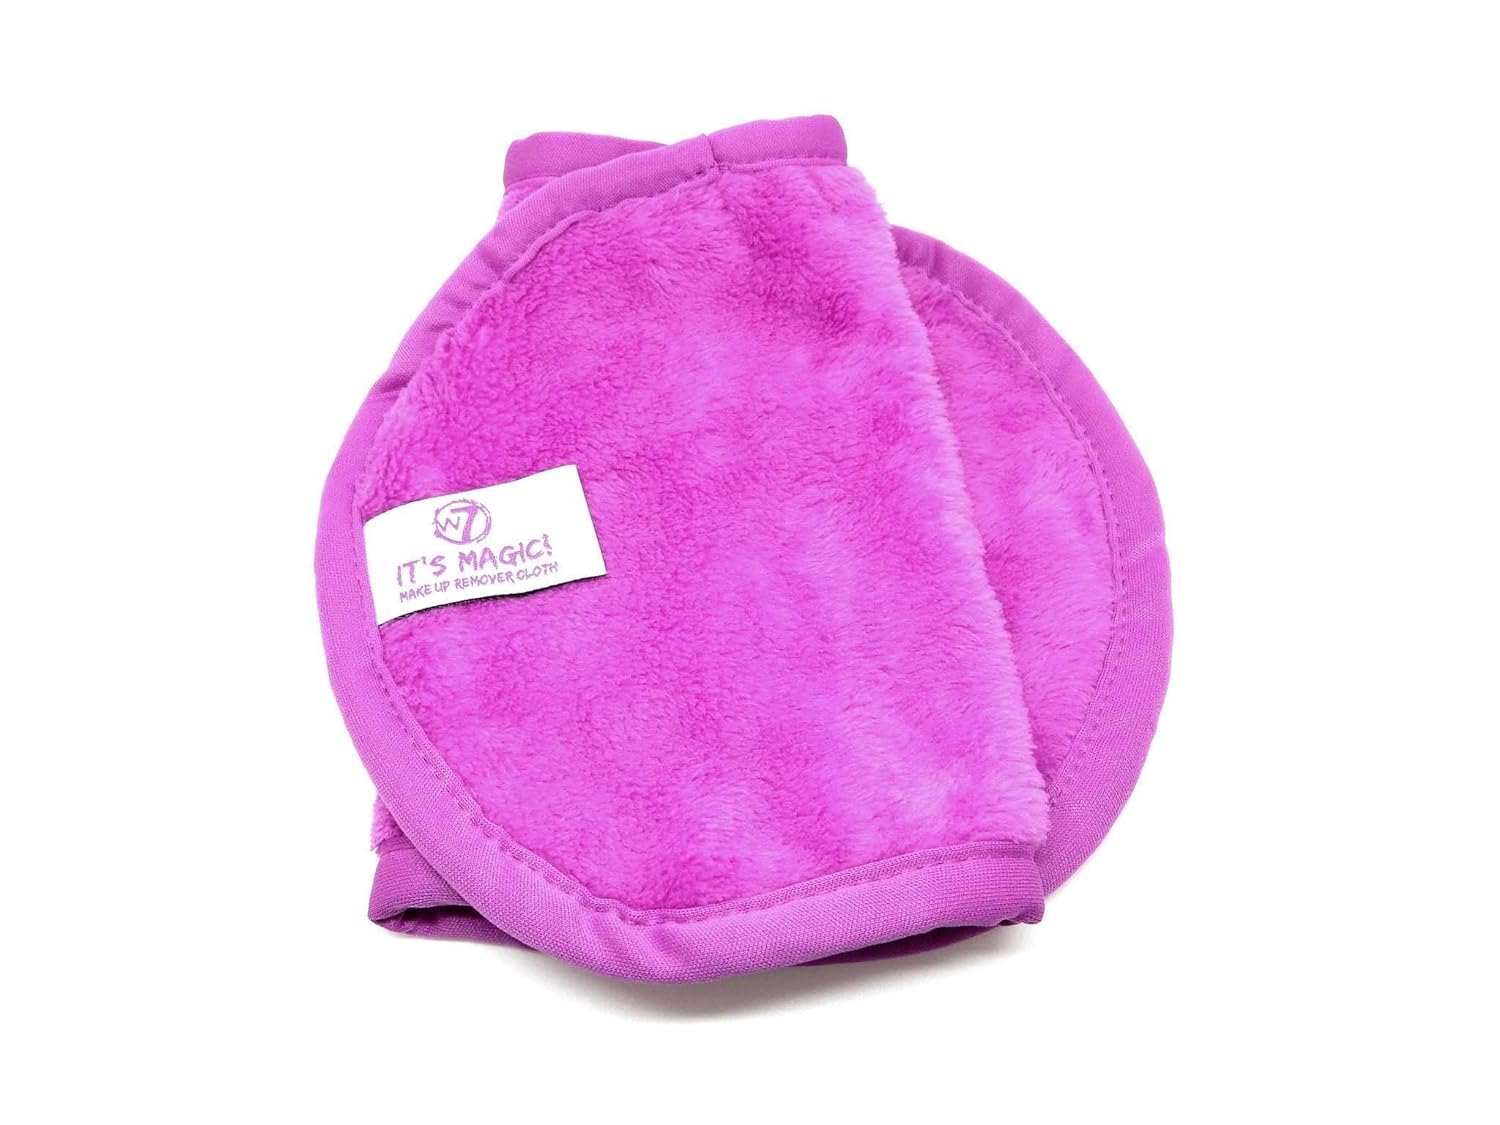 W7 It's Magic Makeup Remover Cloth - Reusable Microfiber Face Cleansing Cloth - Just Add Water : Beauty & Personal Care